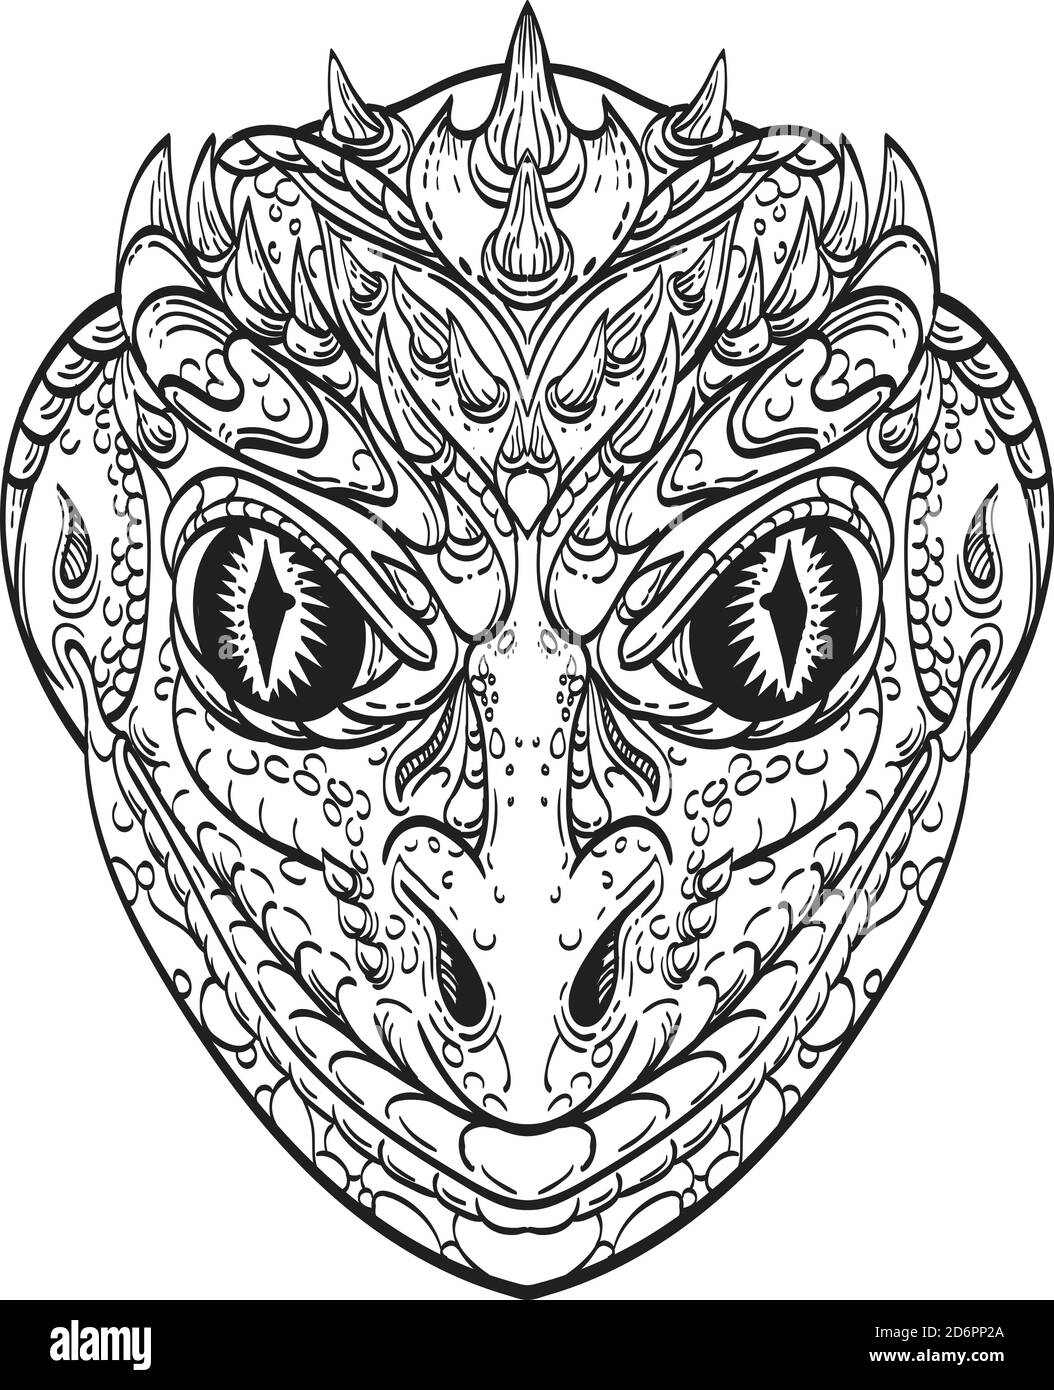 Line art drawing illustration head of a reptilian humanoid or anthropomorphic reptile, legendary creature in myth and folklore part human part lizard Stock Vector